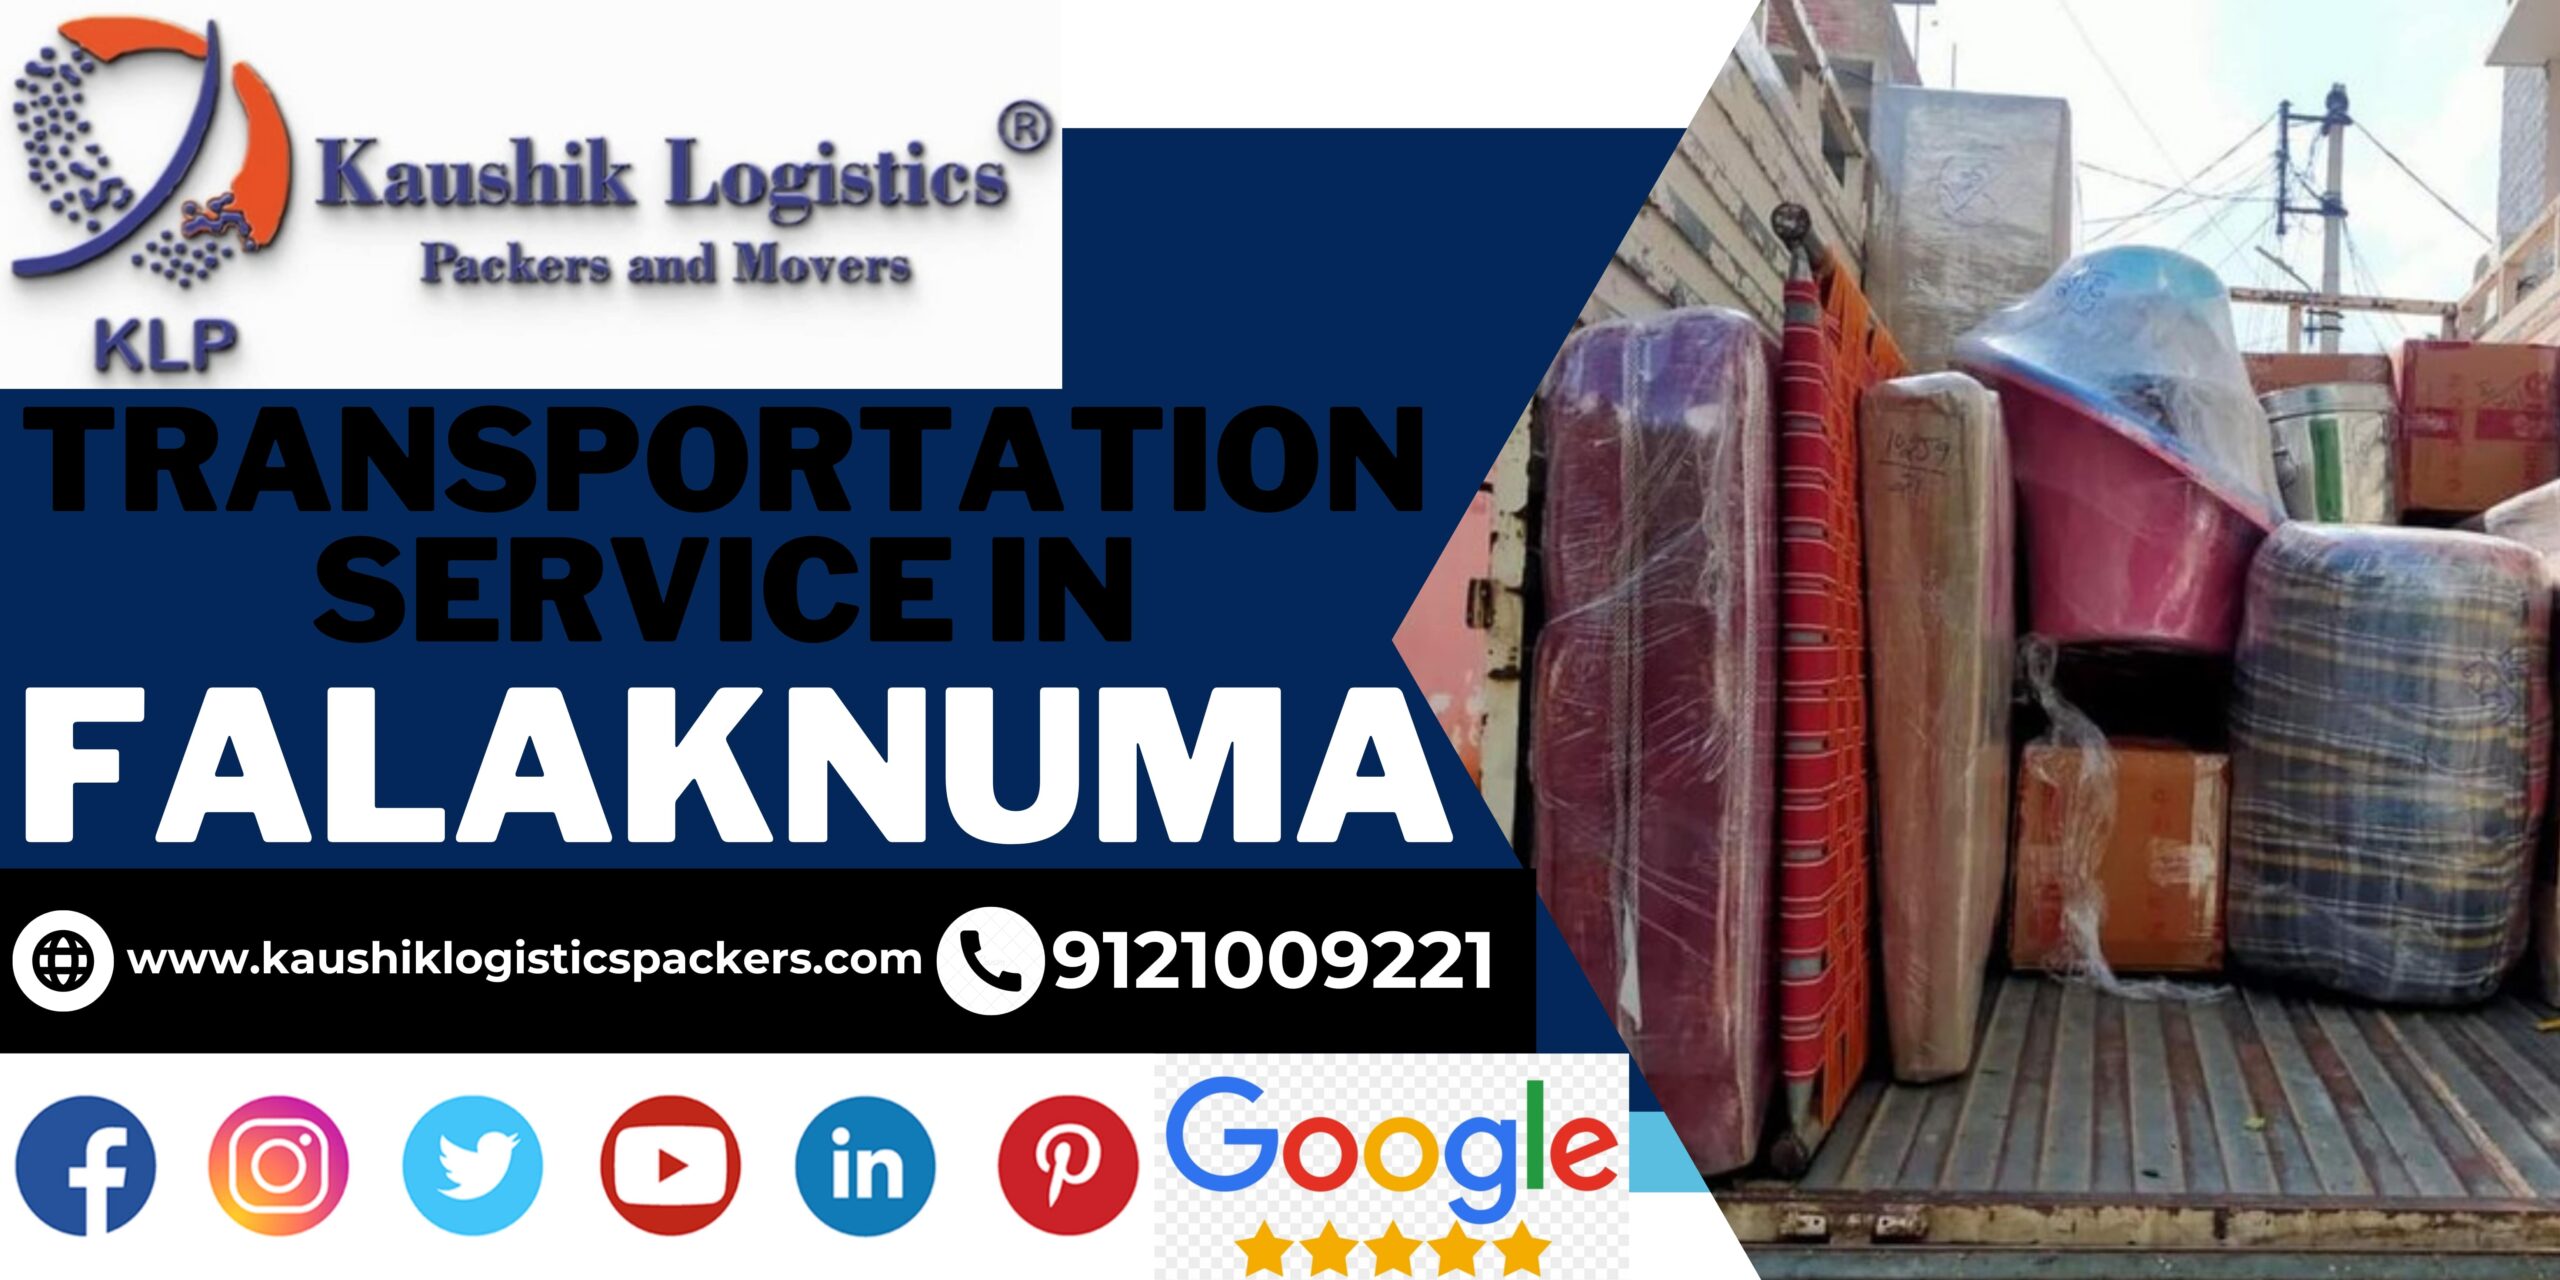 Packers and Movers In Falaknuma